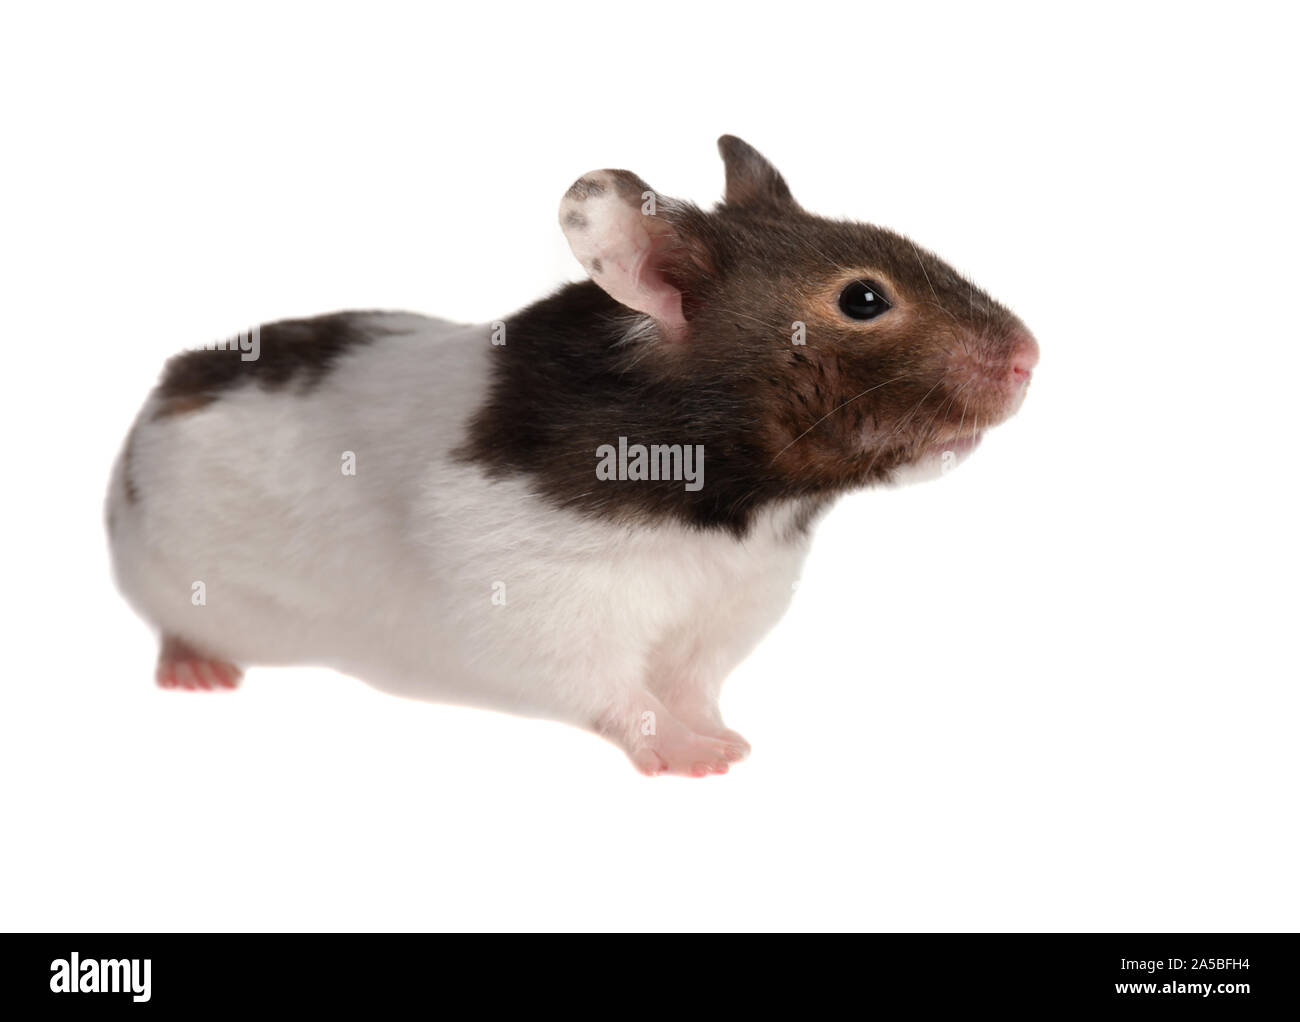 Gerbil on a white background Stock Photo